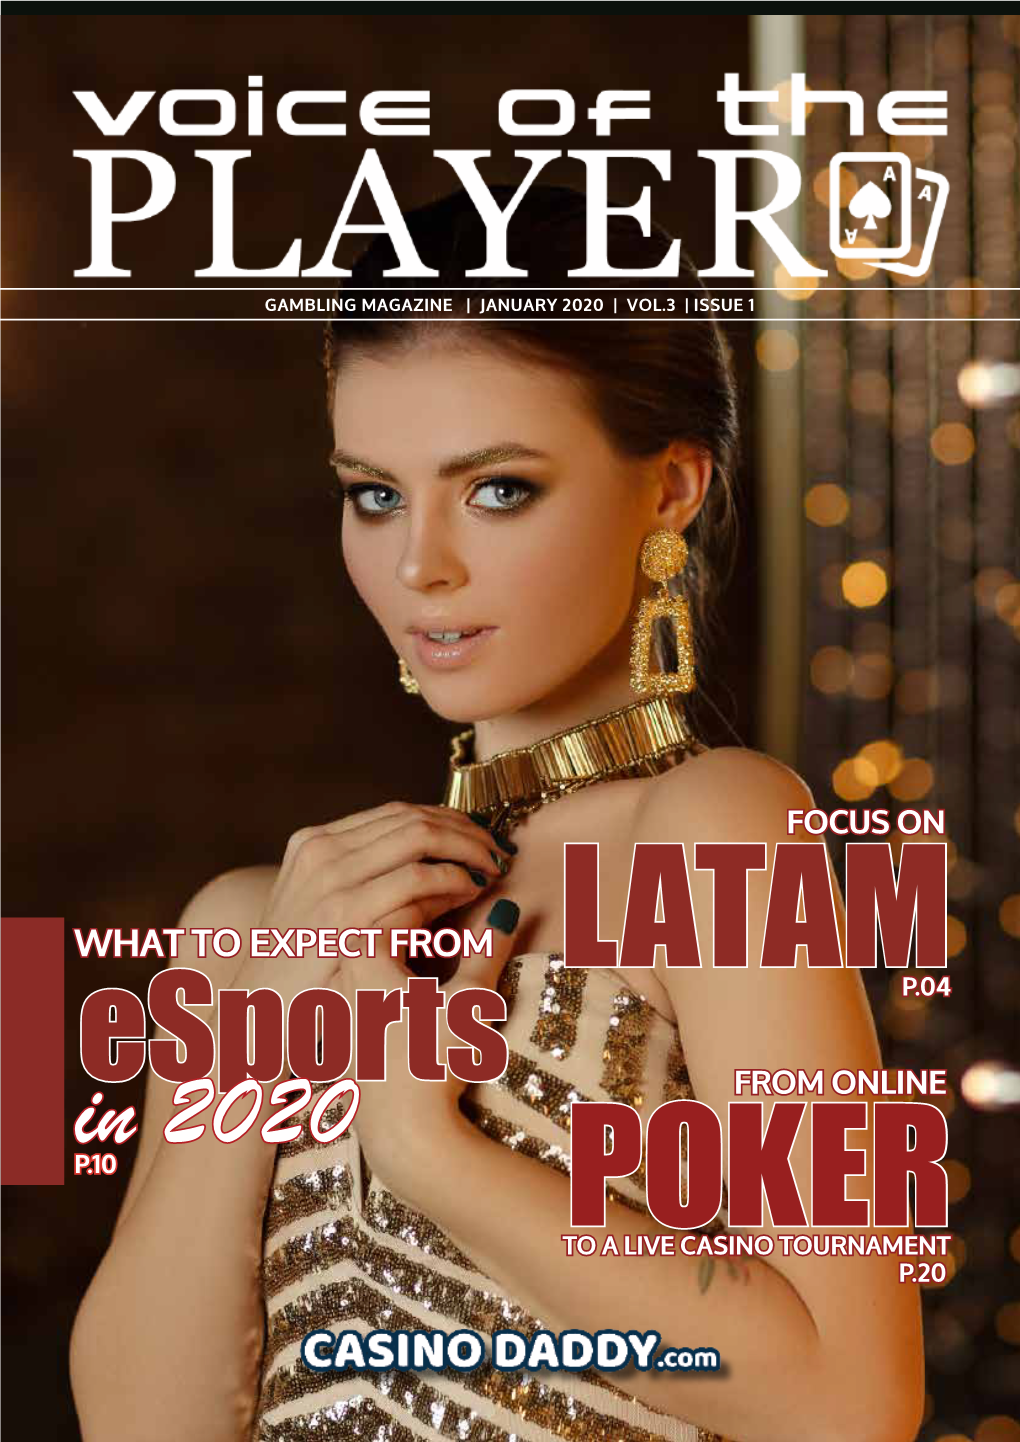 In 2020 P.10 TOPOKER a LIVE CASINO TOURNAMENT P.20 Letter from the Editor